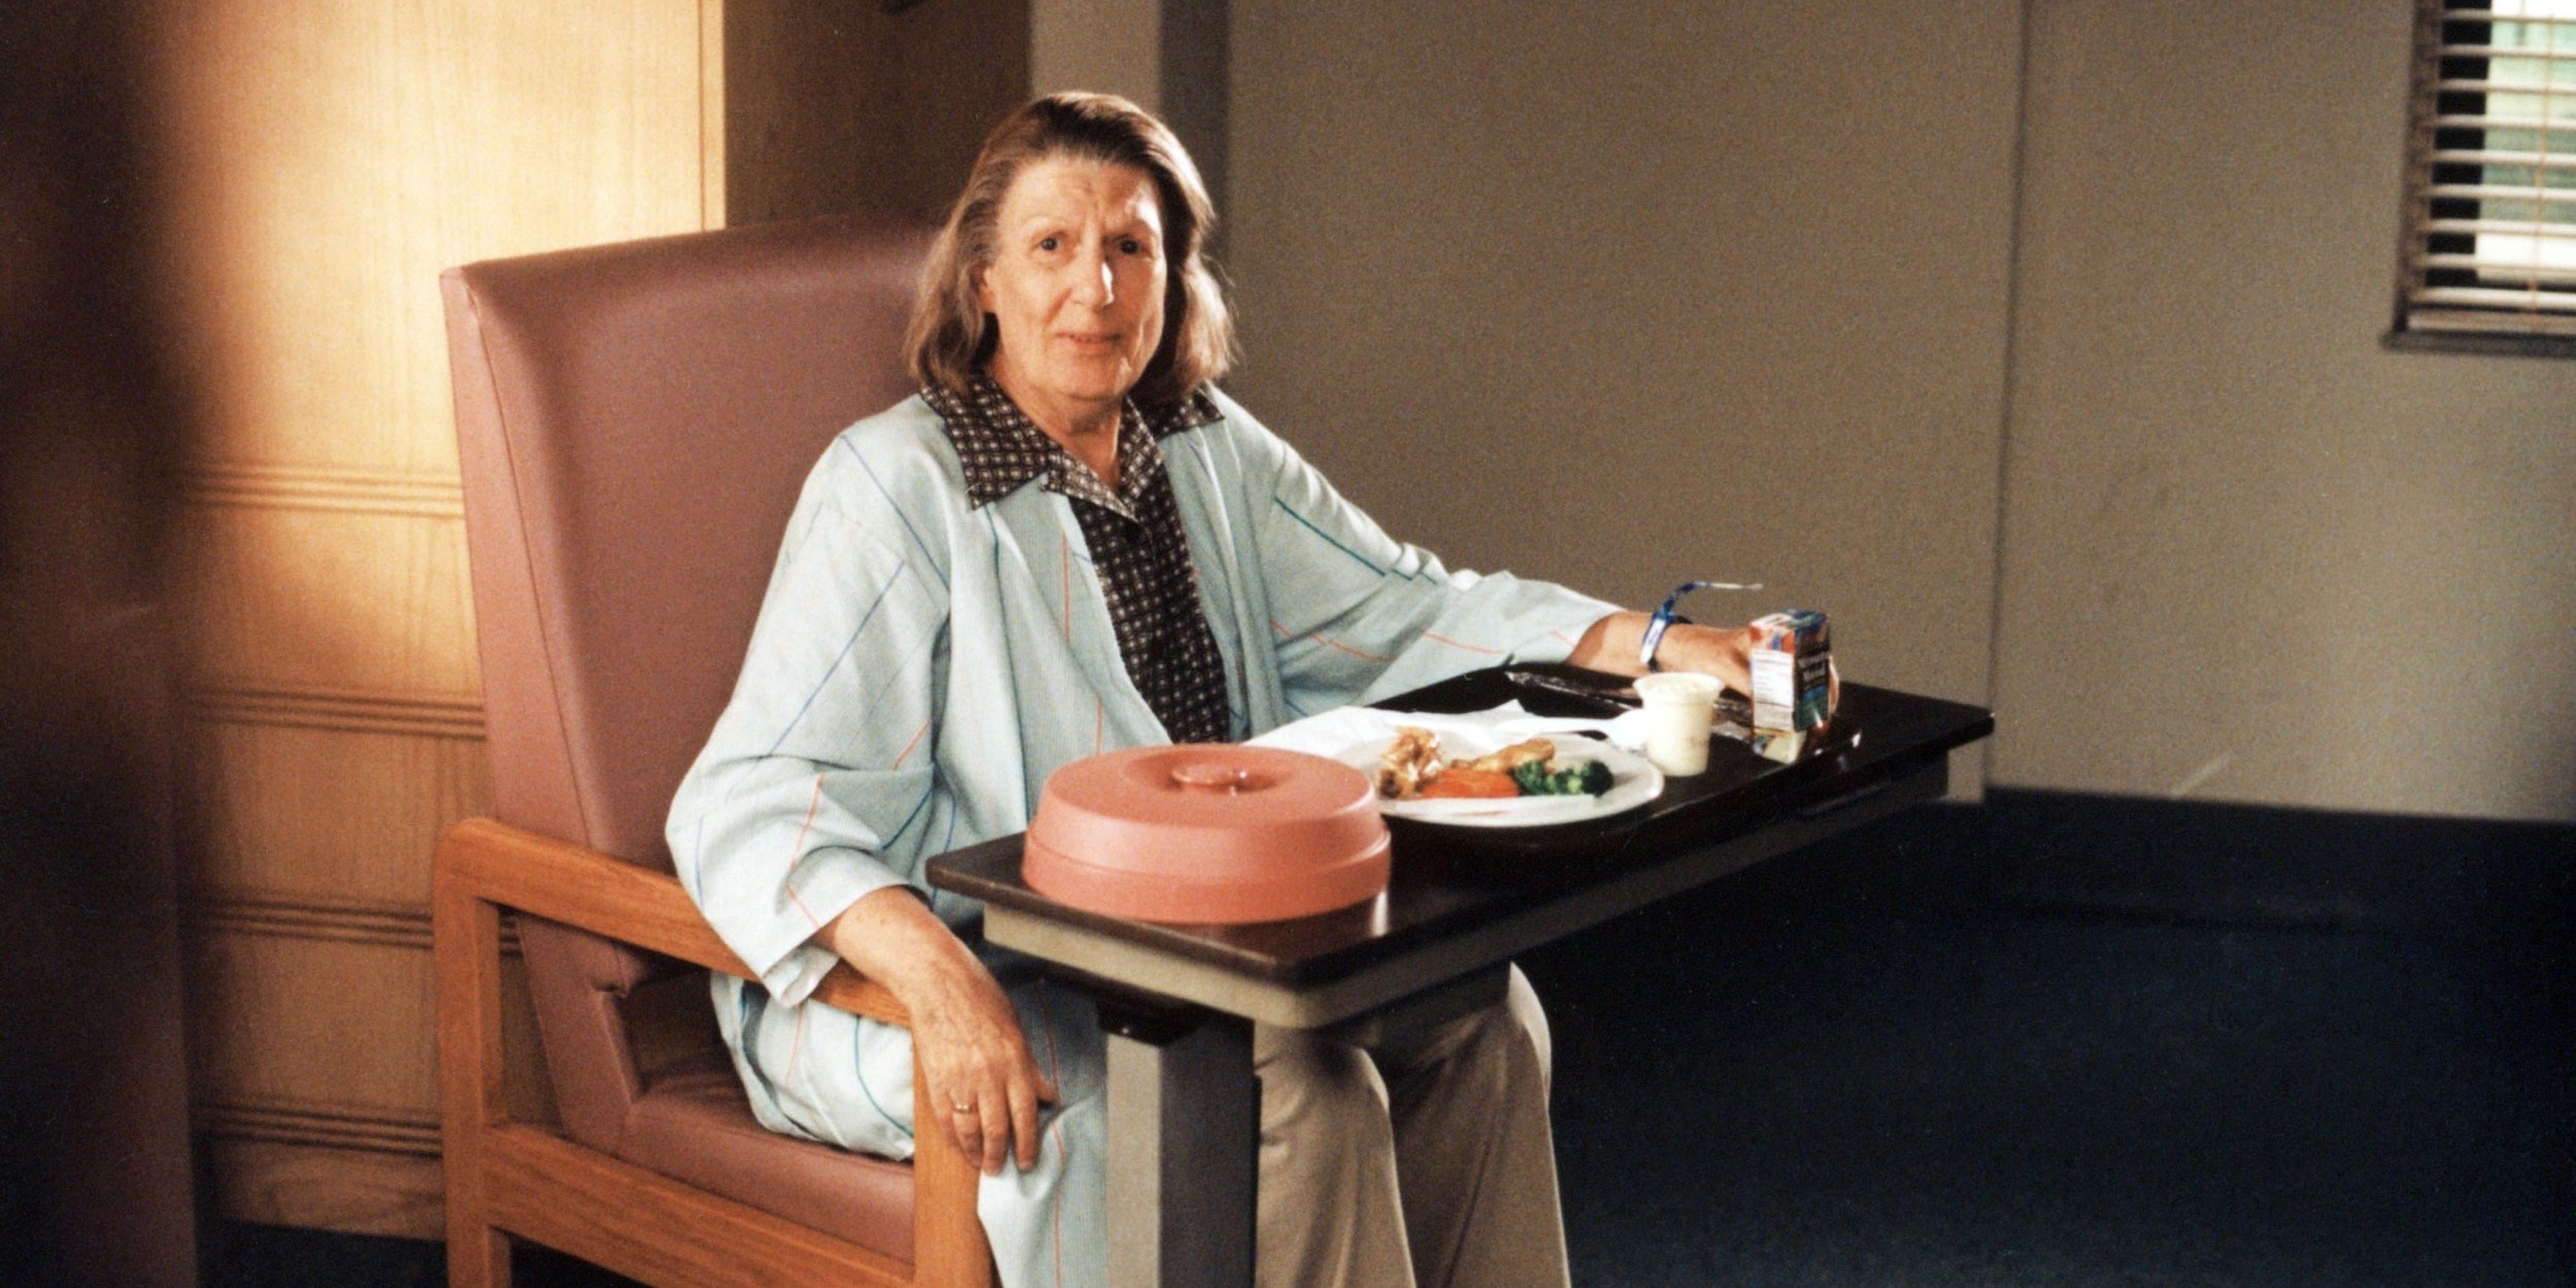 Livia Soprano sits in front of a table with food